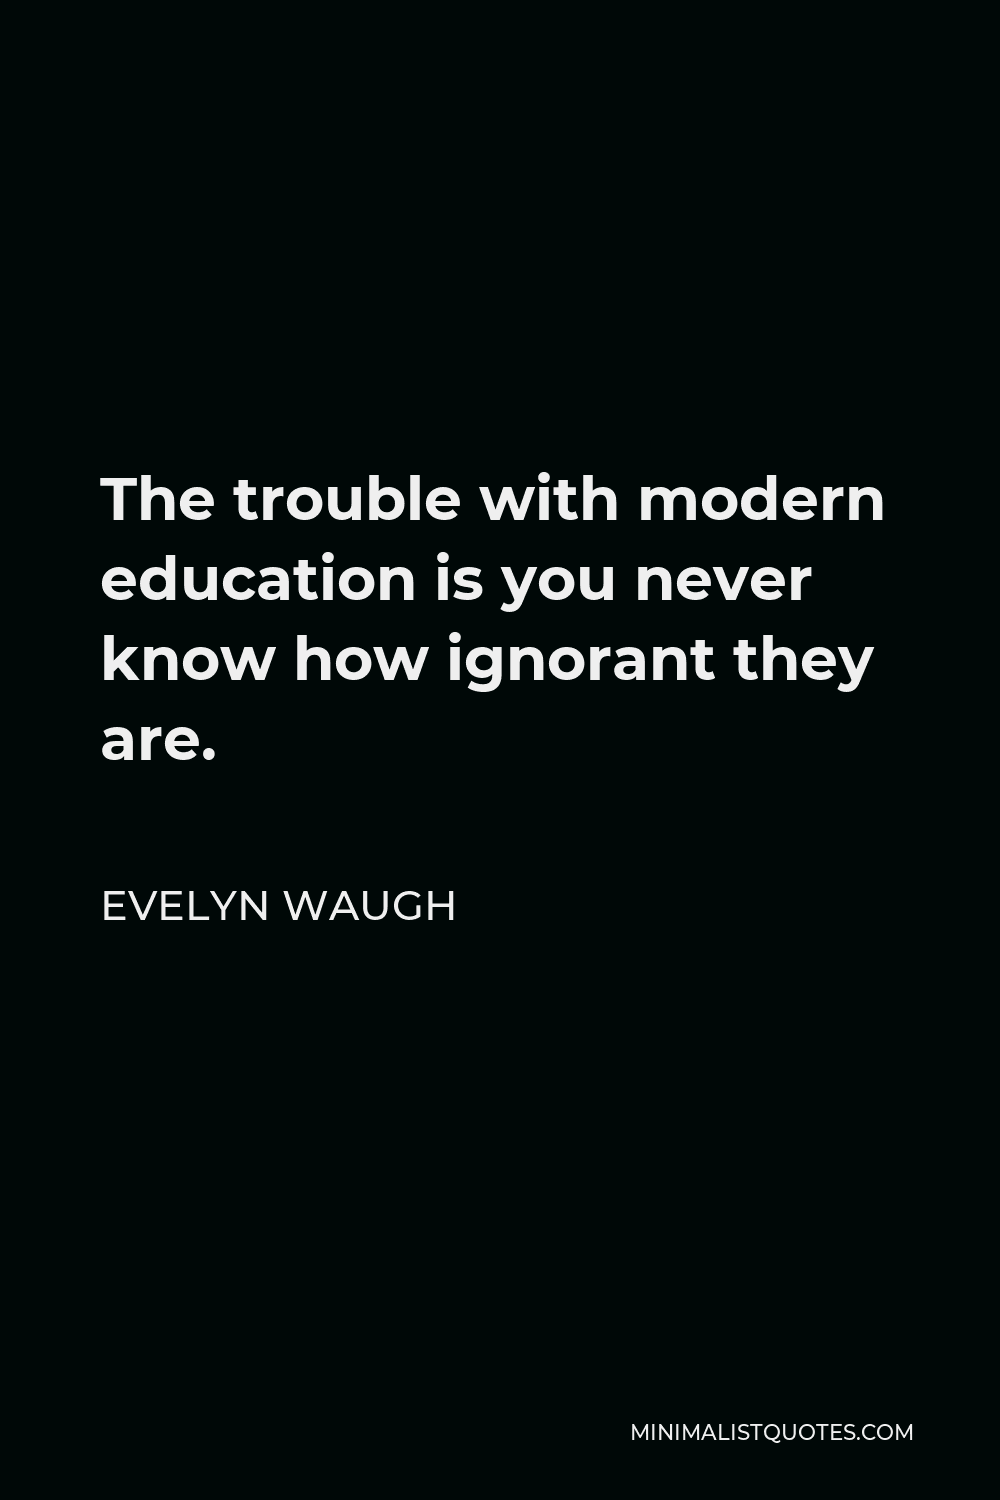 Evelyn Waugh Quote - The trouble with modern education is you never know how ignorant they are.